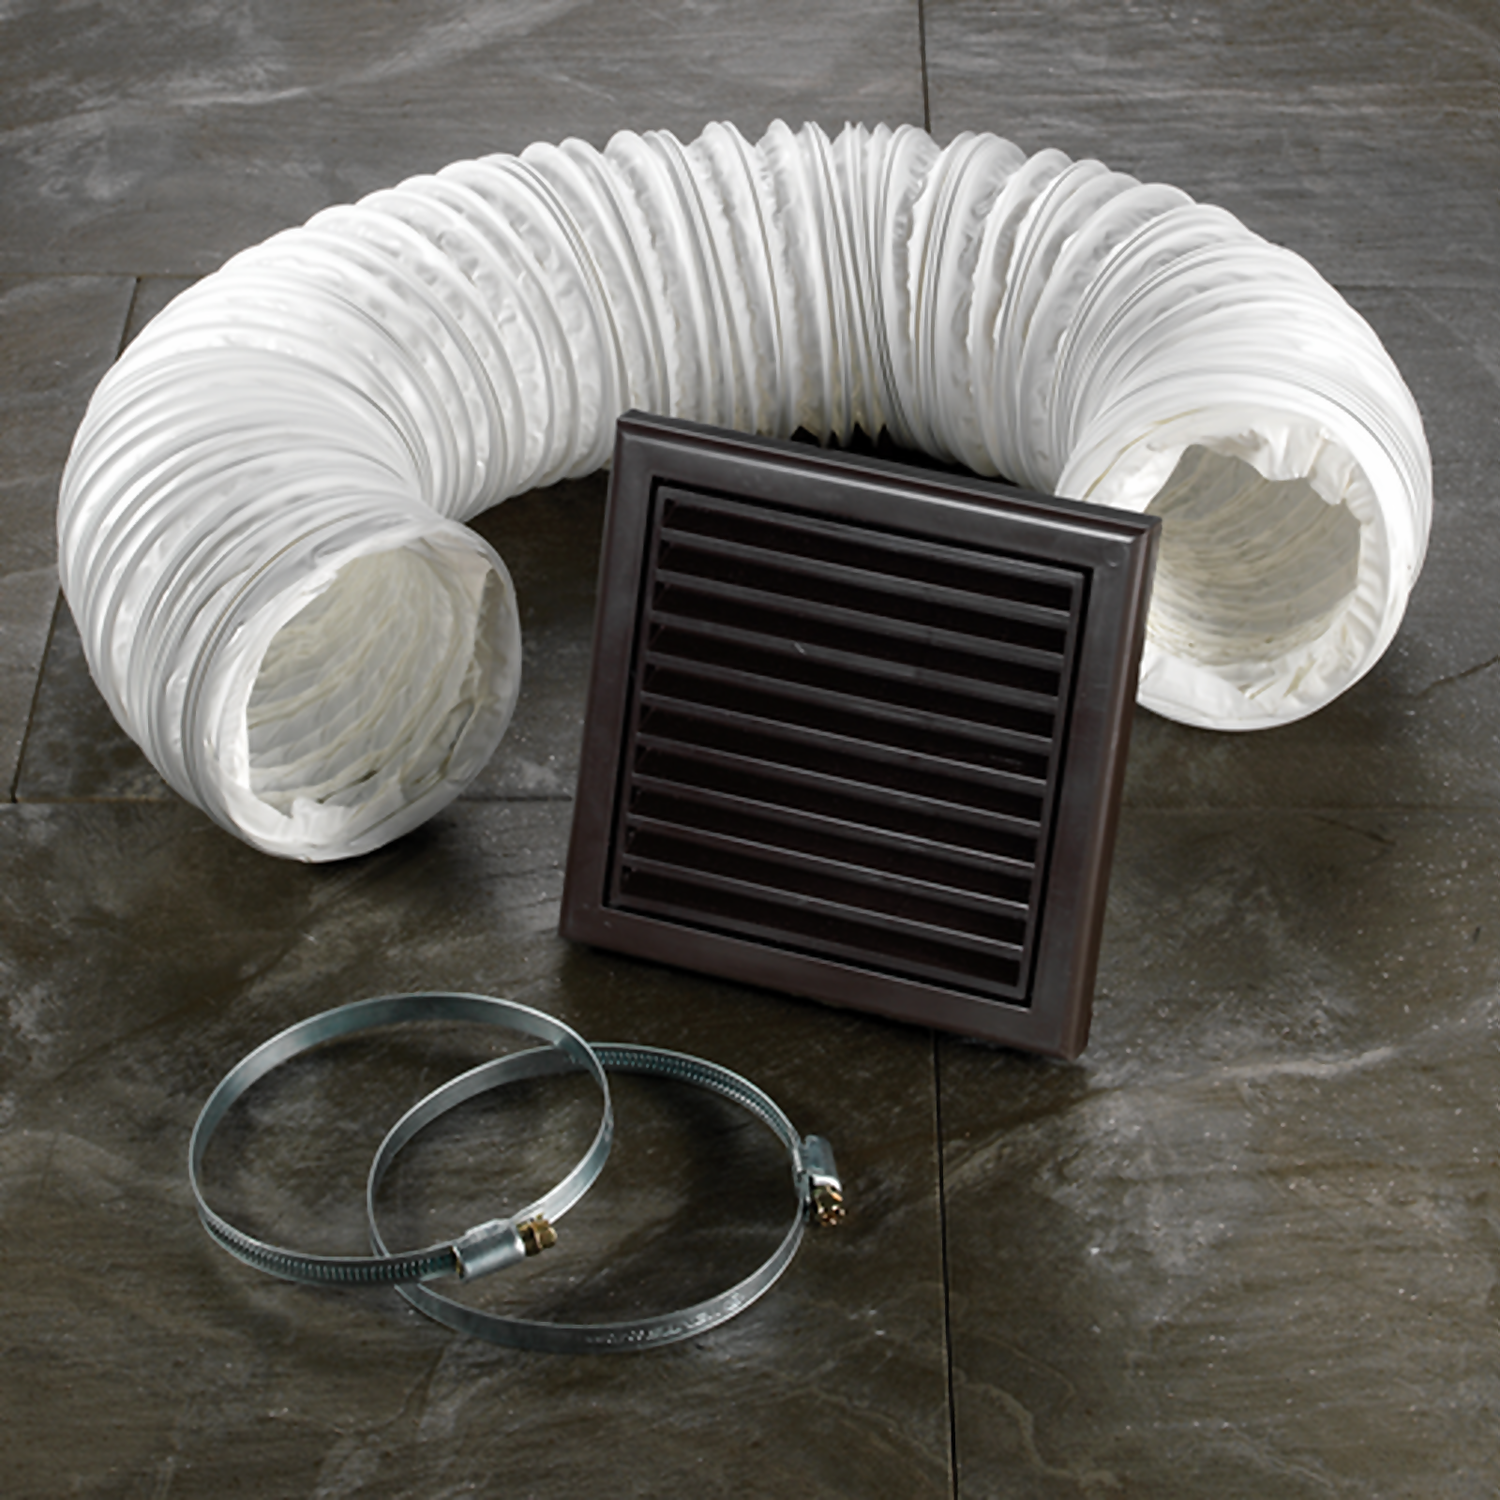 Flexible Ducting For Wall Mounted Bathroom Extractor Fans - Brown